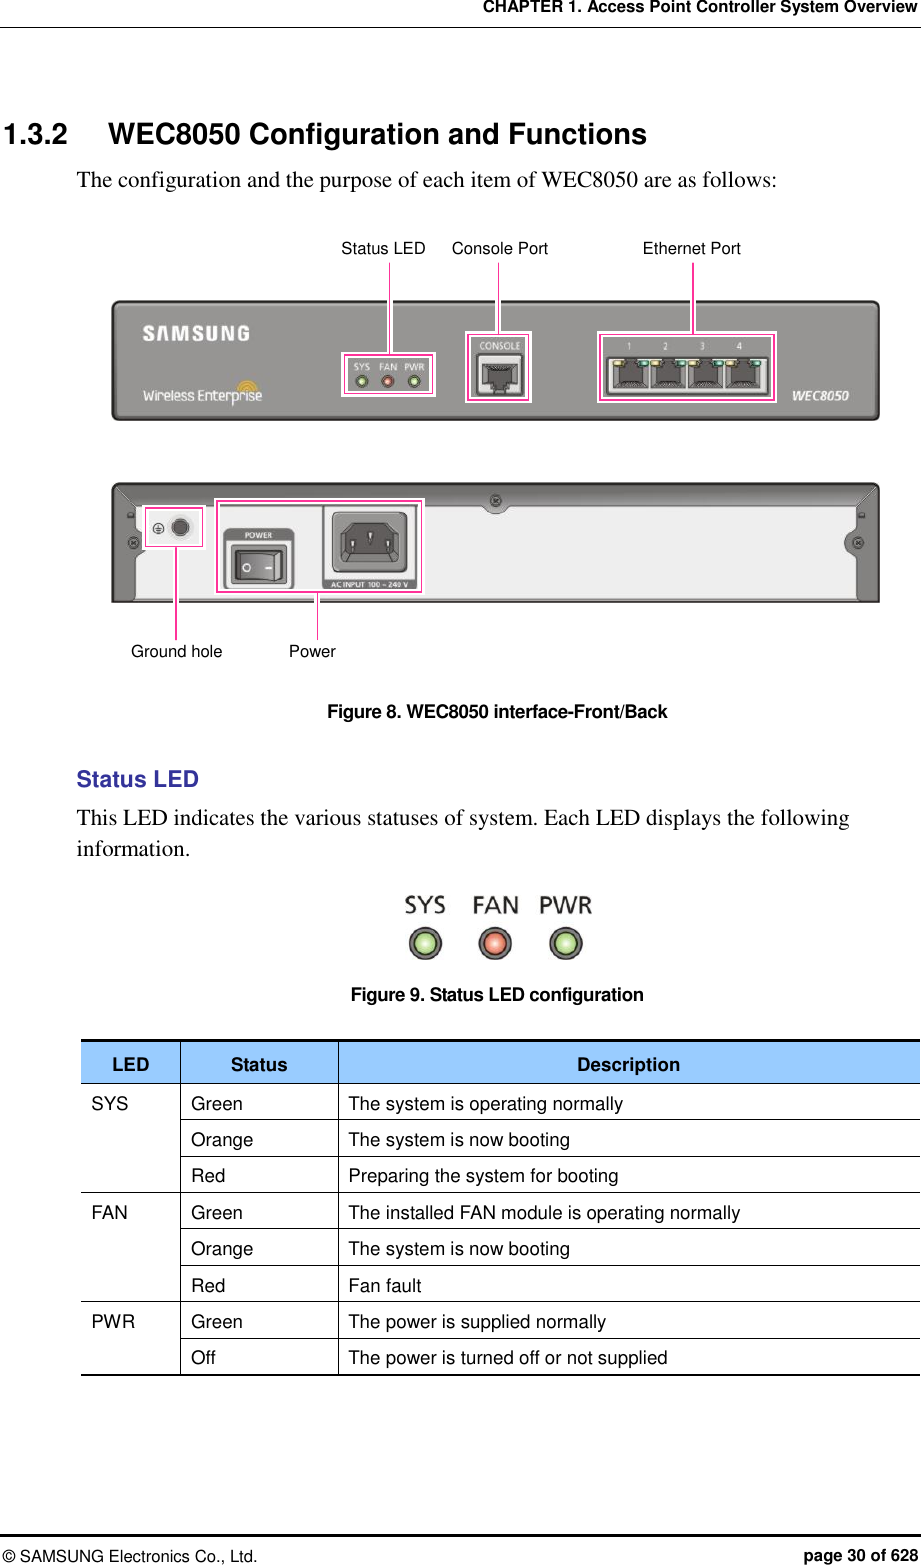 CHAPTER 1. Access Point Controller System Overview ©  SAMSUNG Electronics Co., Ltd.  page 30 of 628 1.3.2  WEC8050 Configuration and Functions The configuration and the purpose of each item of WEC8050 are as follows:  Figure 8. WEC8050 interface-Front/Back  Status LED This LED indicates the various statuses of system. Each LED displays the following information.    Figure 9. Status LED configuration  LED Status Description SYS Green The system is operating normally Orange The system is now booting Red Preparing the system for booting FAN Green The installed FAN module is operating normally Orange The system is now booting Red Fan fault PWR Green The power is supplied normally Off The power is turned off or not supplied  Status LED Console Port Ethernet Port Ground hole Power 